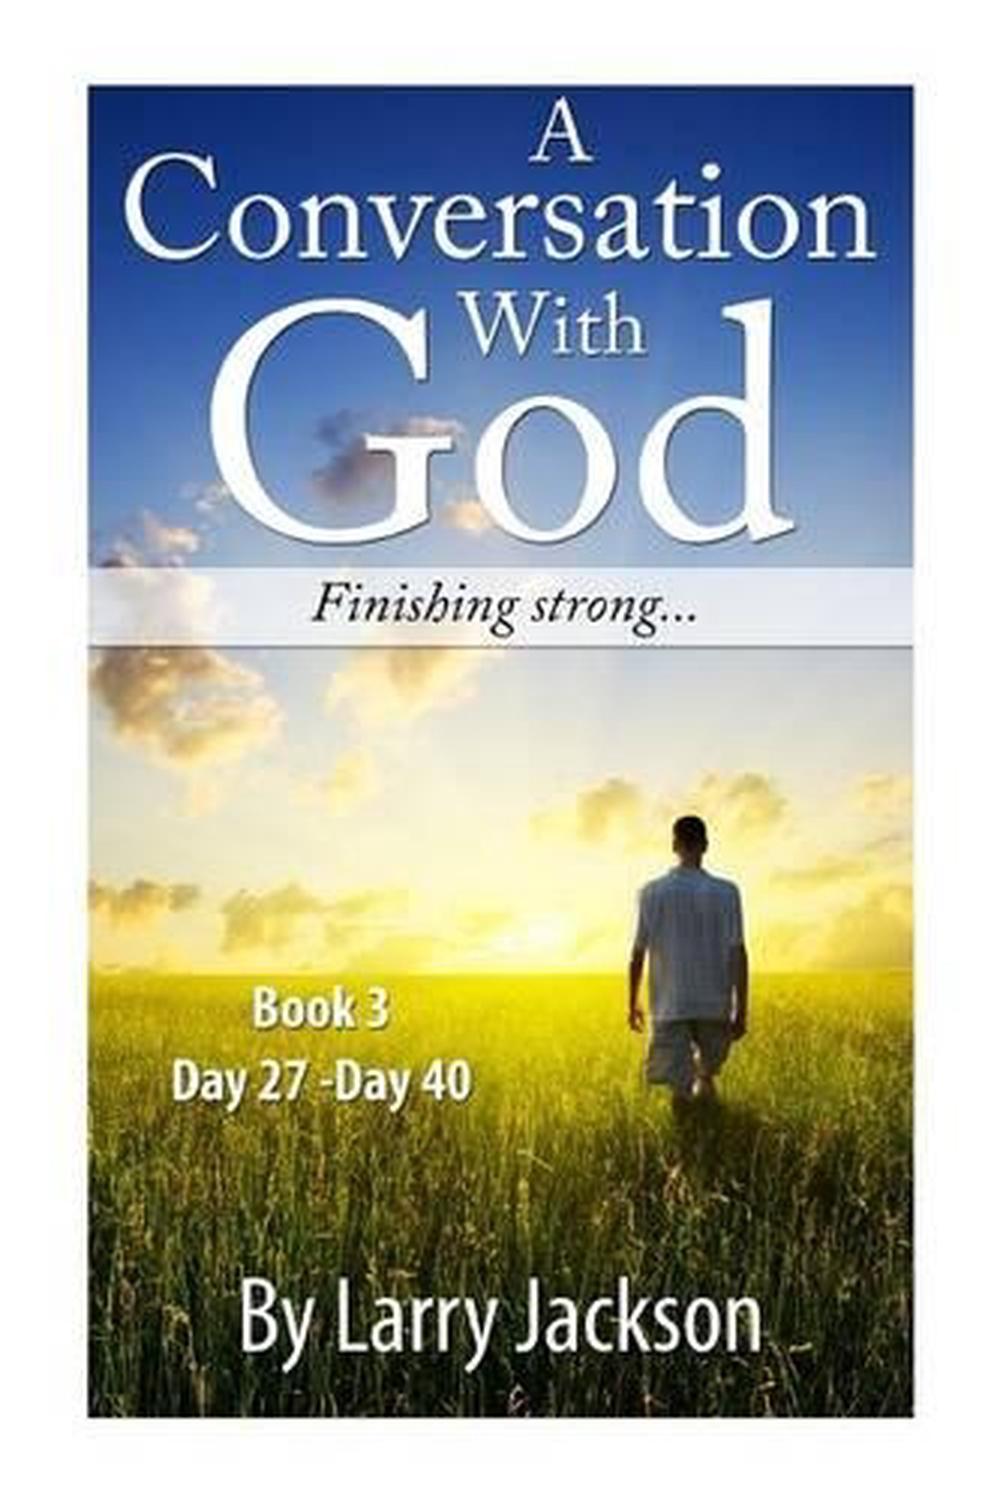 focus on family james dobson conversations with god book